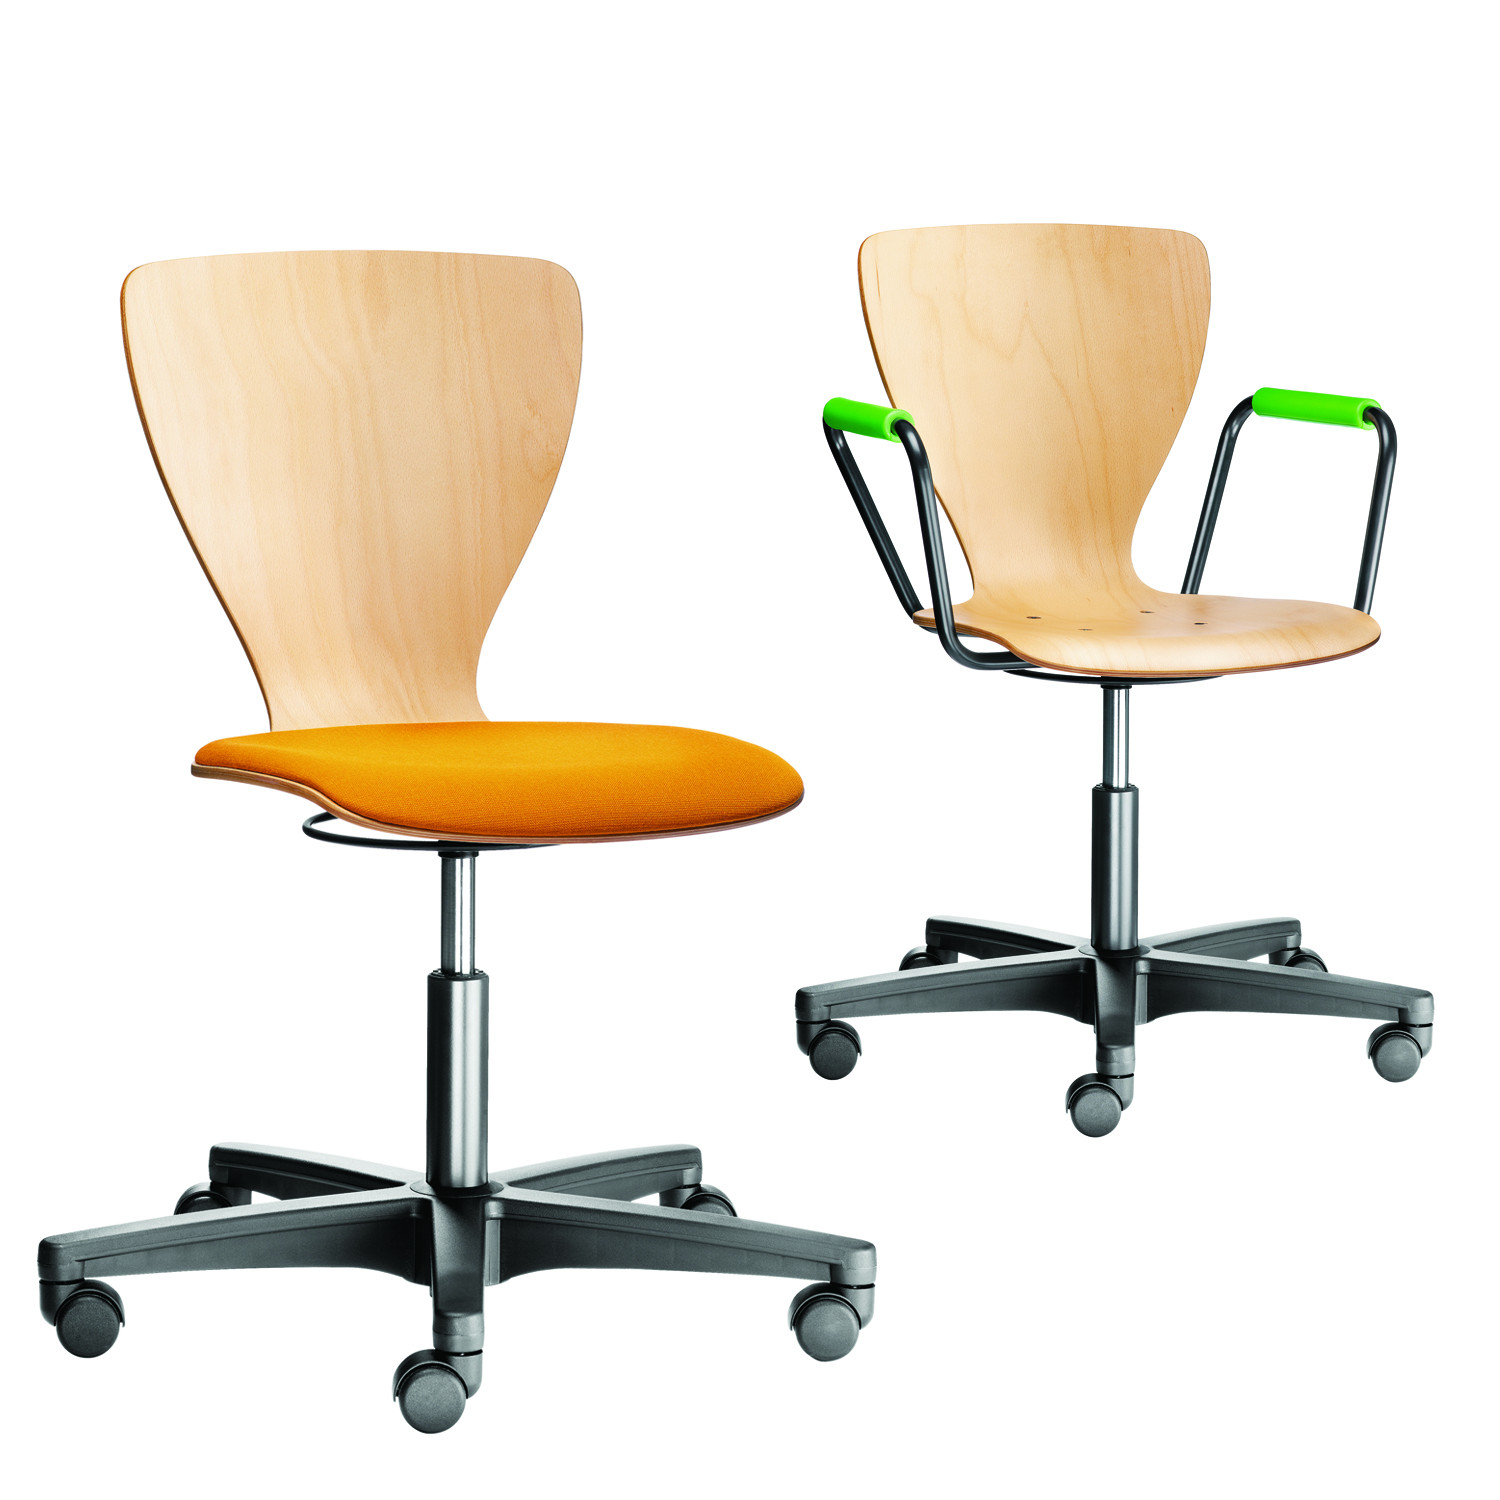 Ahrend 450 School Chairs